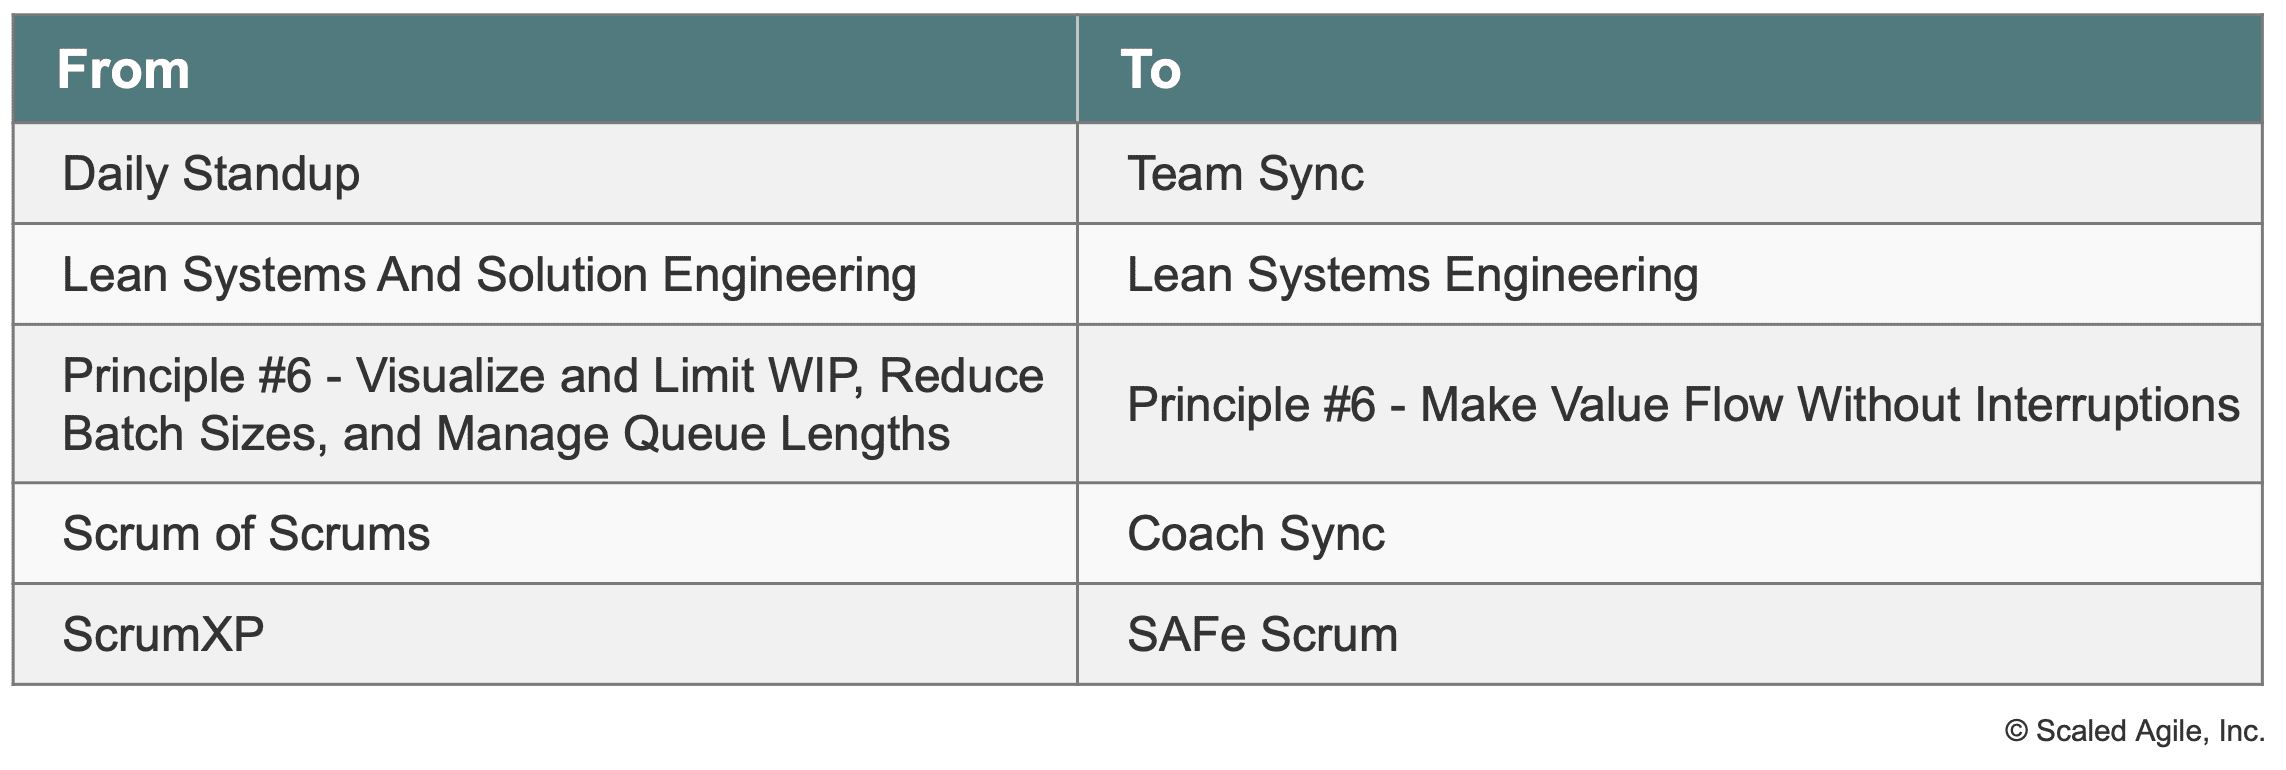 The SAFe 5.0 term Daily Standup is change to Team Sync in SAFe 6.0. The SAFe 5.0 term Lean Systems And Solution Engineering is change to Lean Systems Engineering in SAFe 6.0. The SAFe 5.0 term Scrum of Scrums is change to Coach Sync in SAFe 6.0. 
The SAFe 5.0 term ScrumXP is change to SAFe Scrum in SAFe 6.0. 